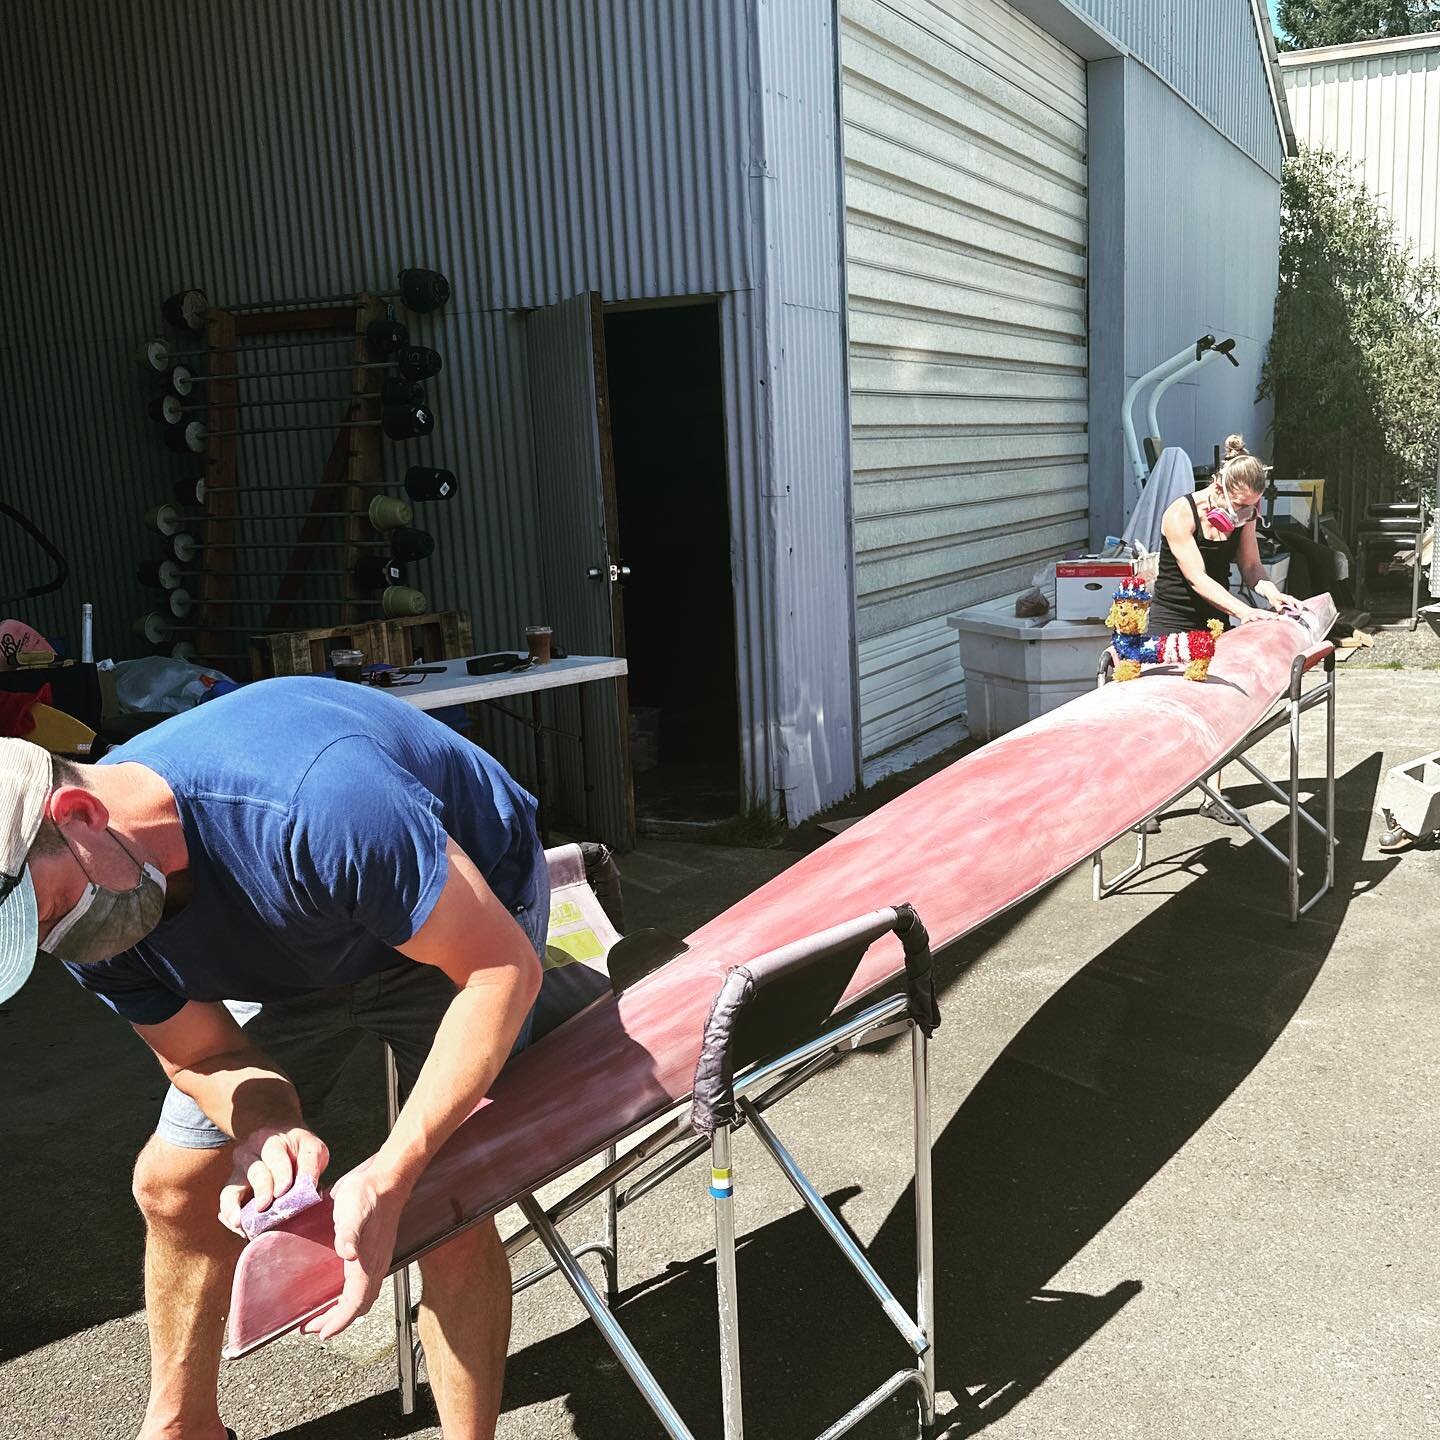 #learntorow boats are getting a refresh before we start class on Tuesday! We are a #community #rowing program that relies on amazing volunteers. We appreciate all the work they put in.